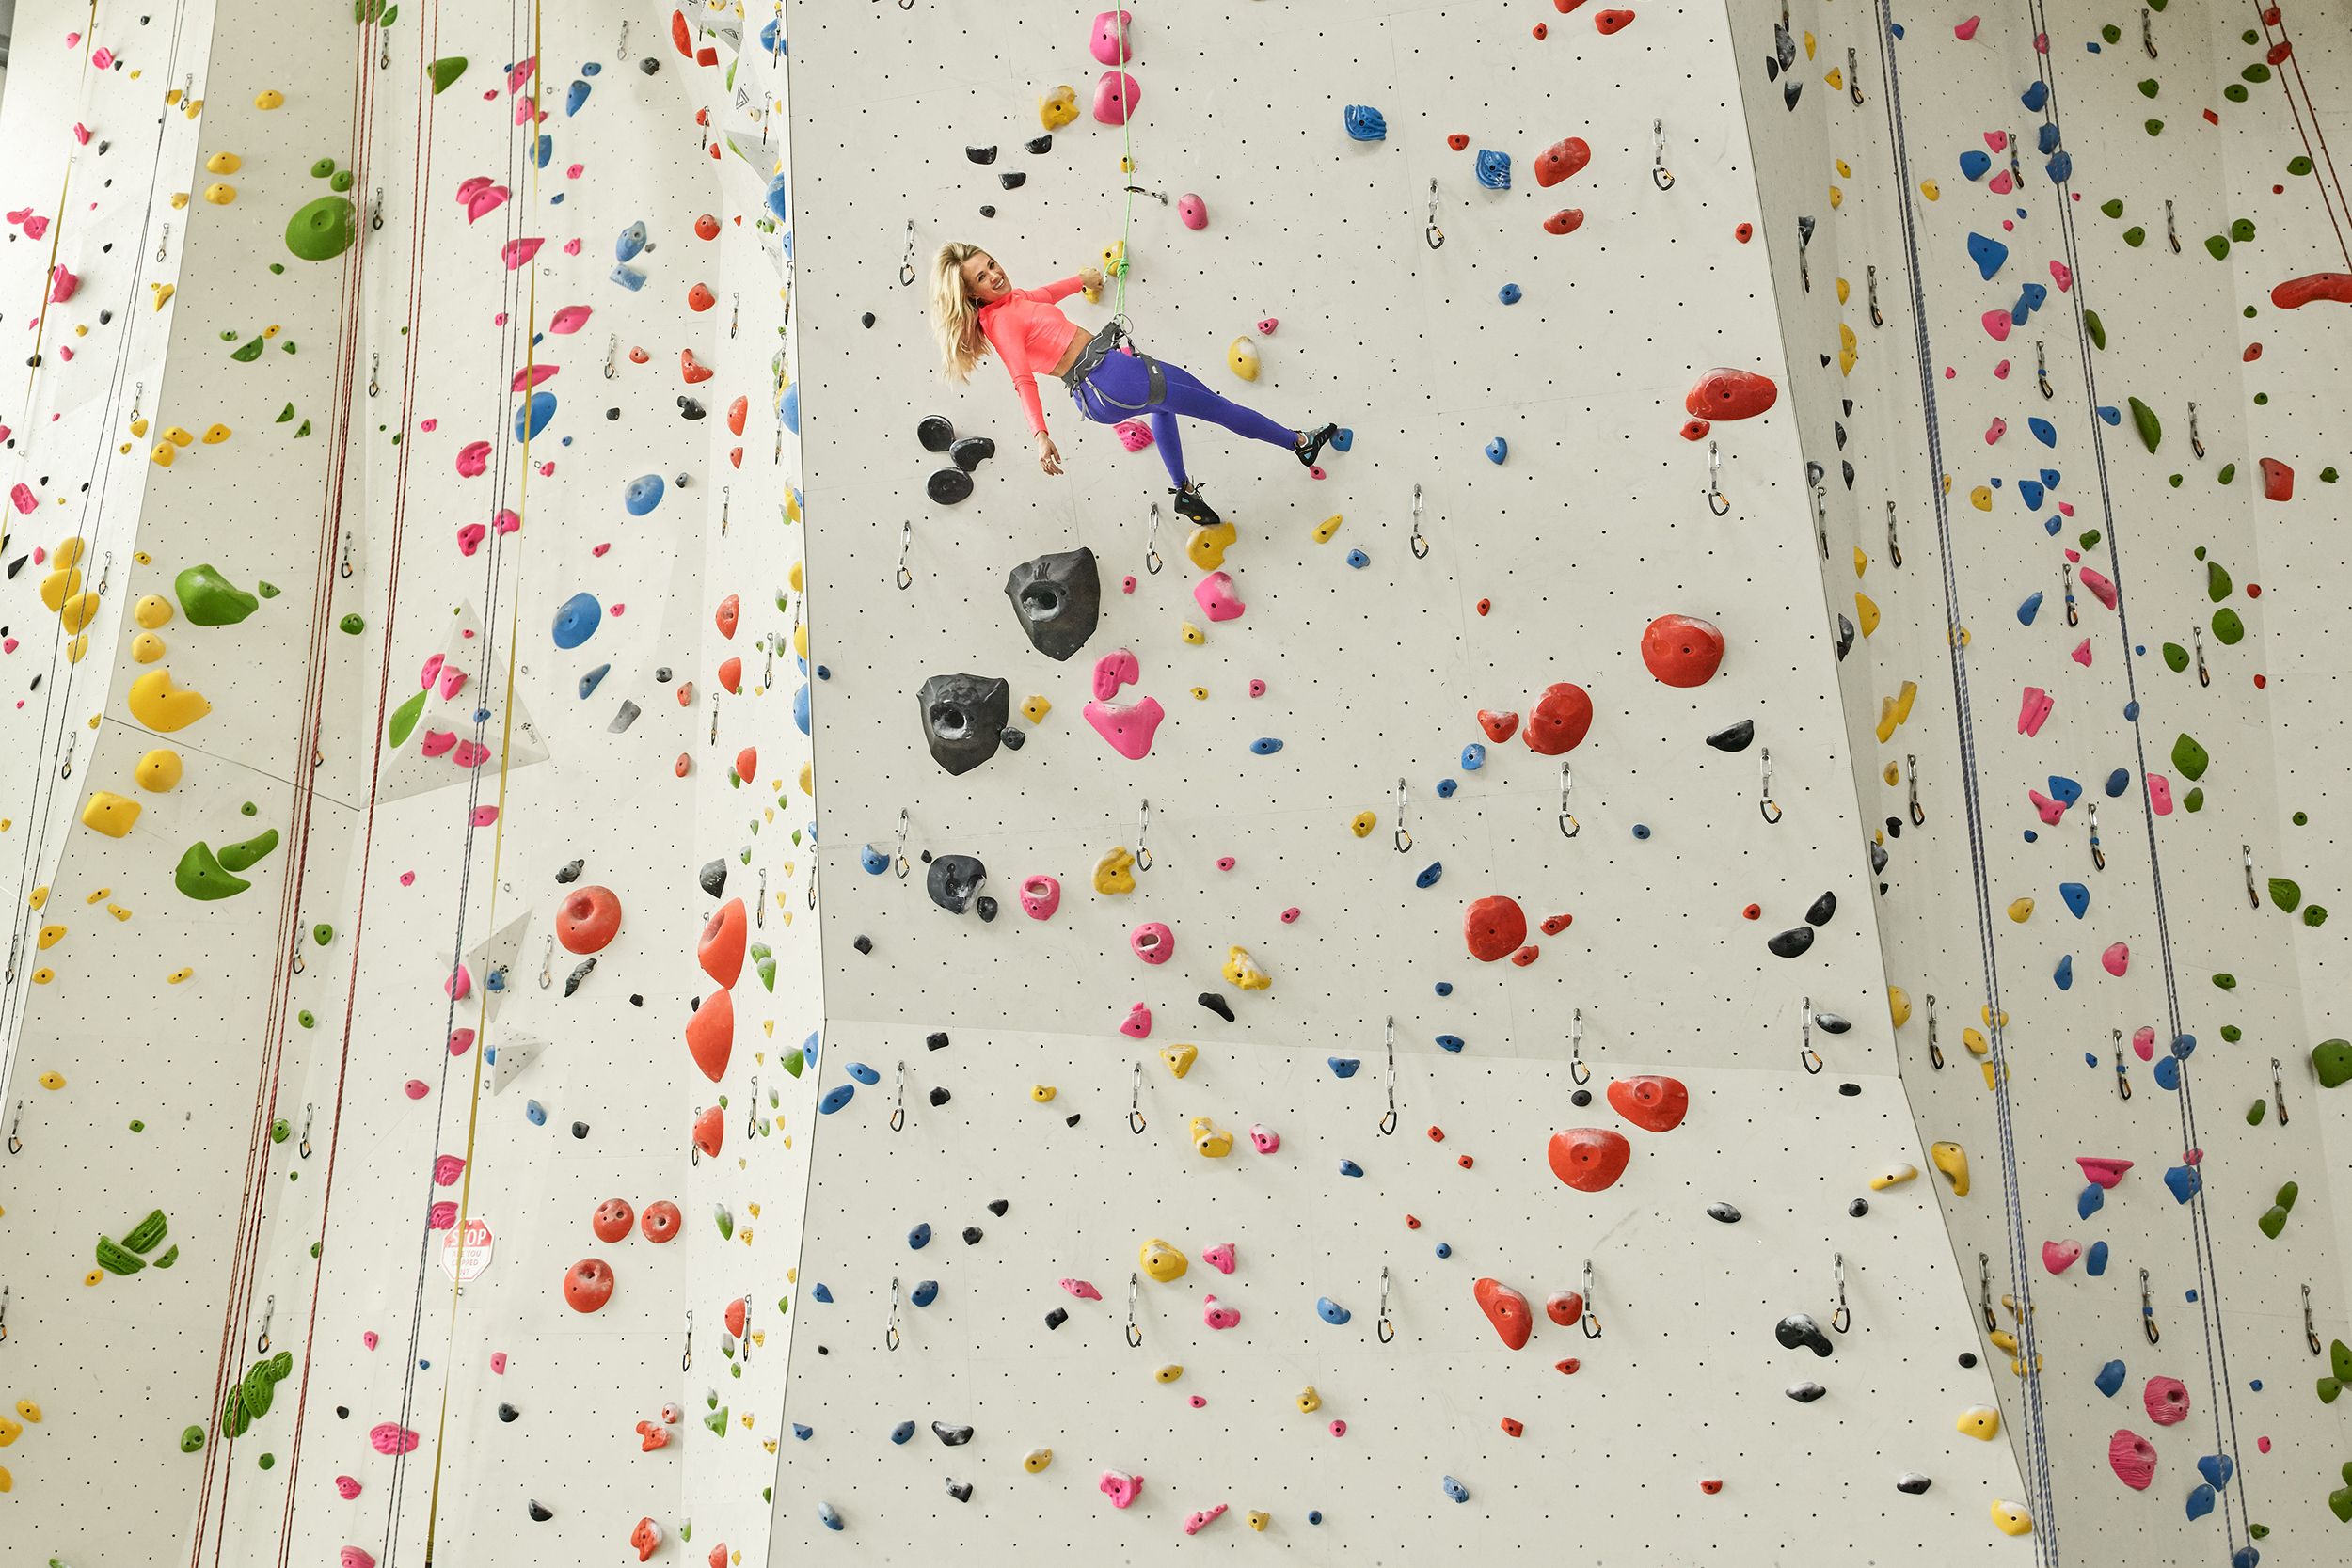 Carrie Underwood Climbing Her Way Into Our Hearts - Photo 7